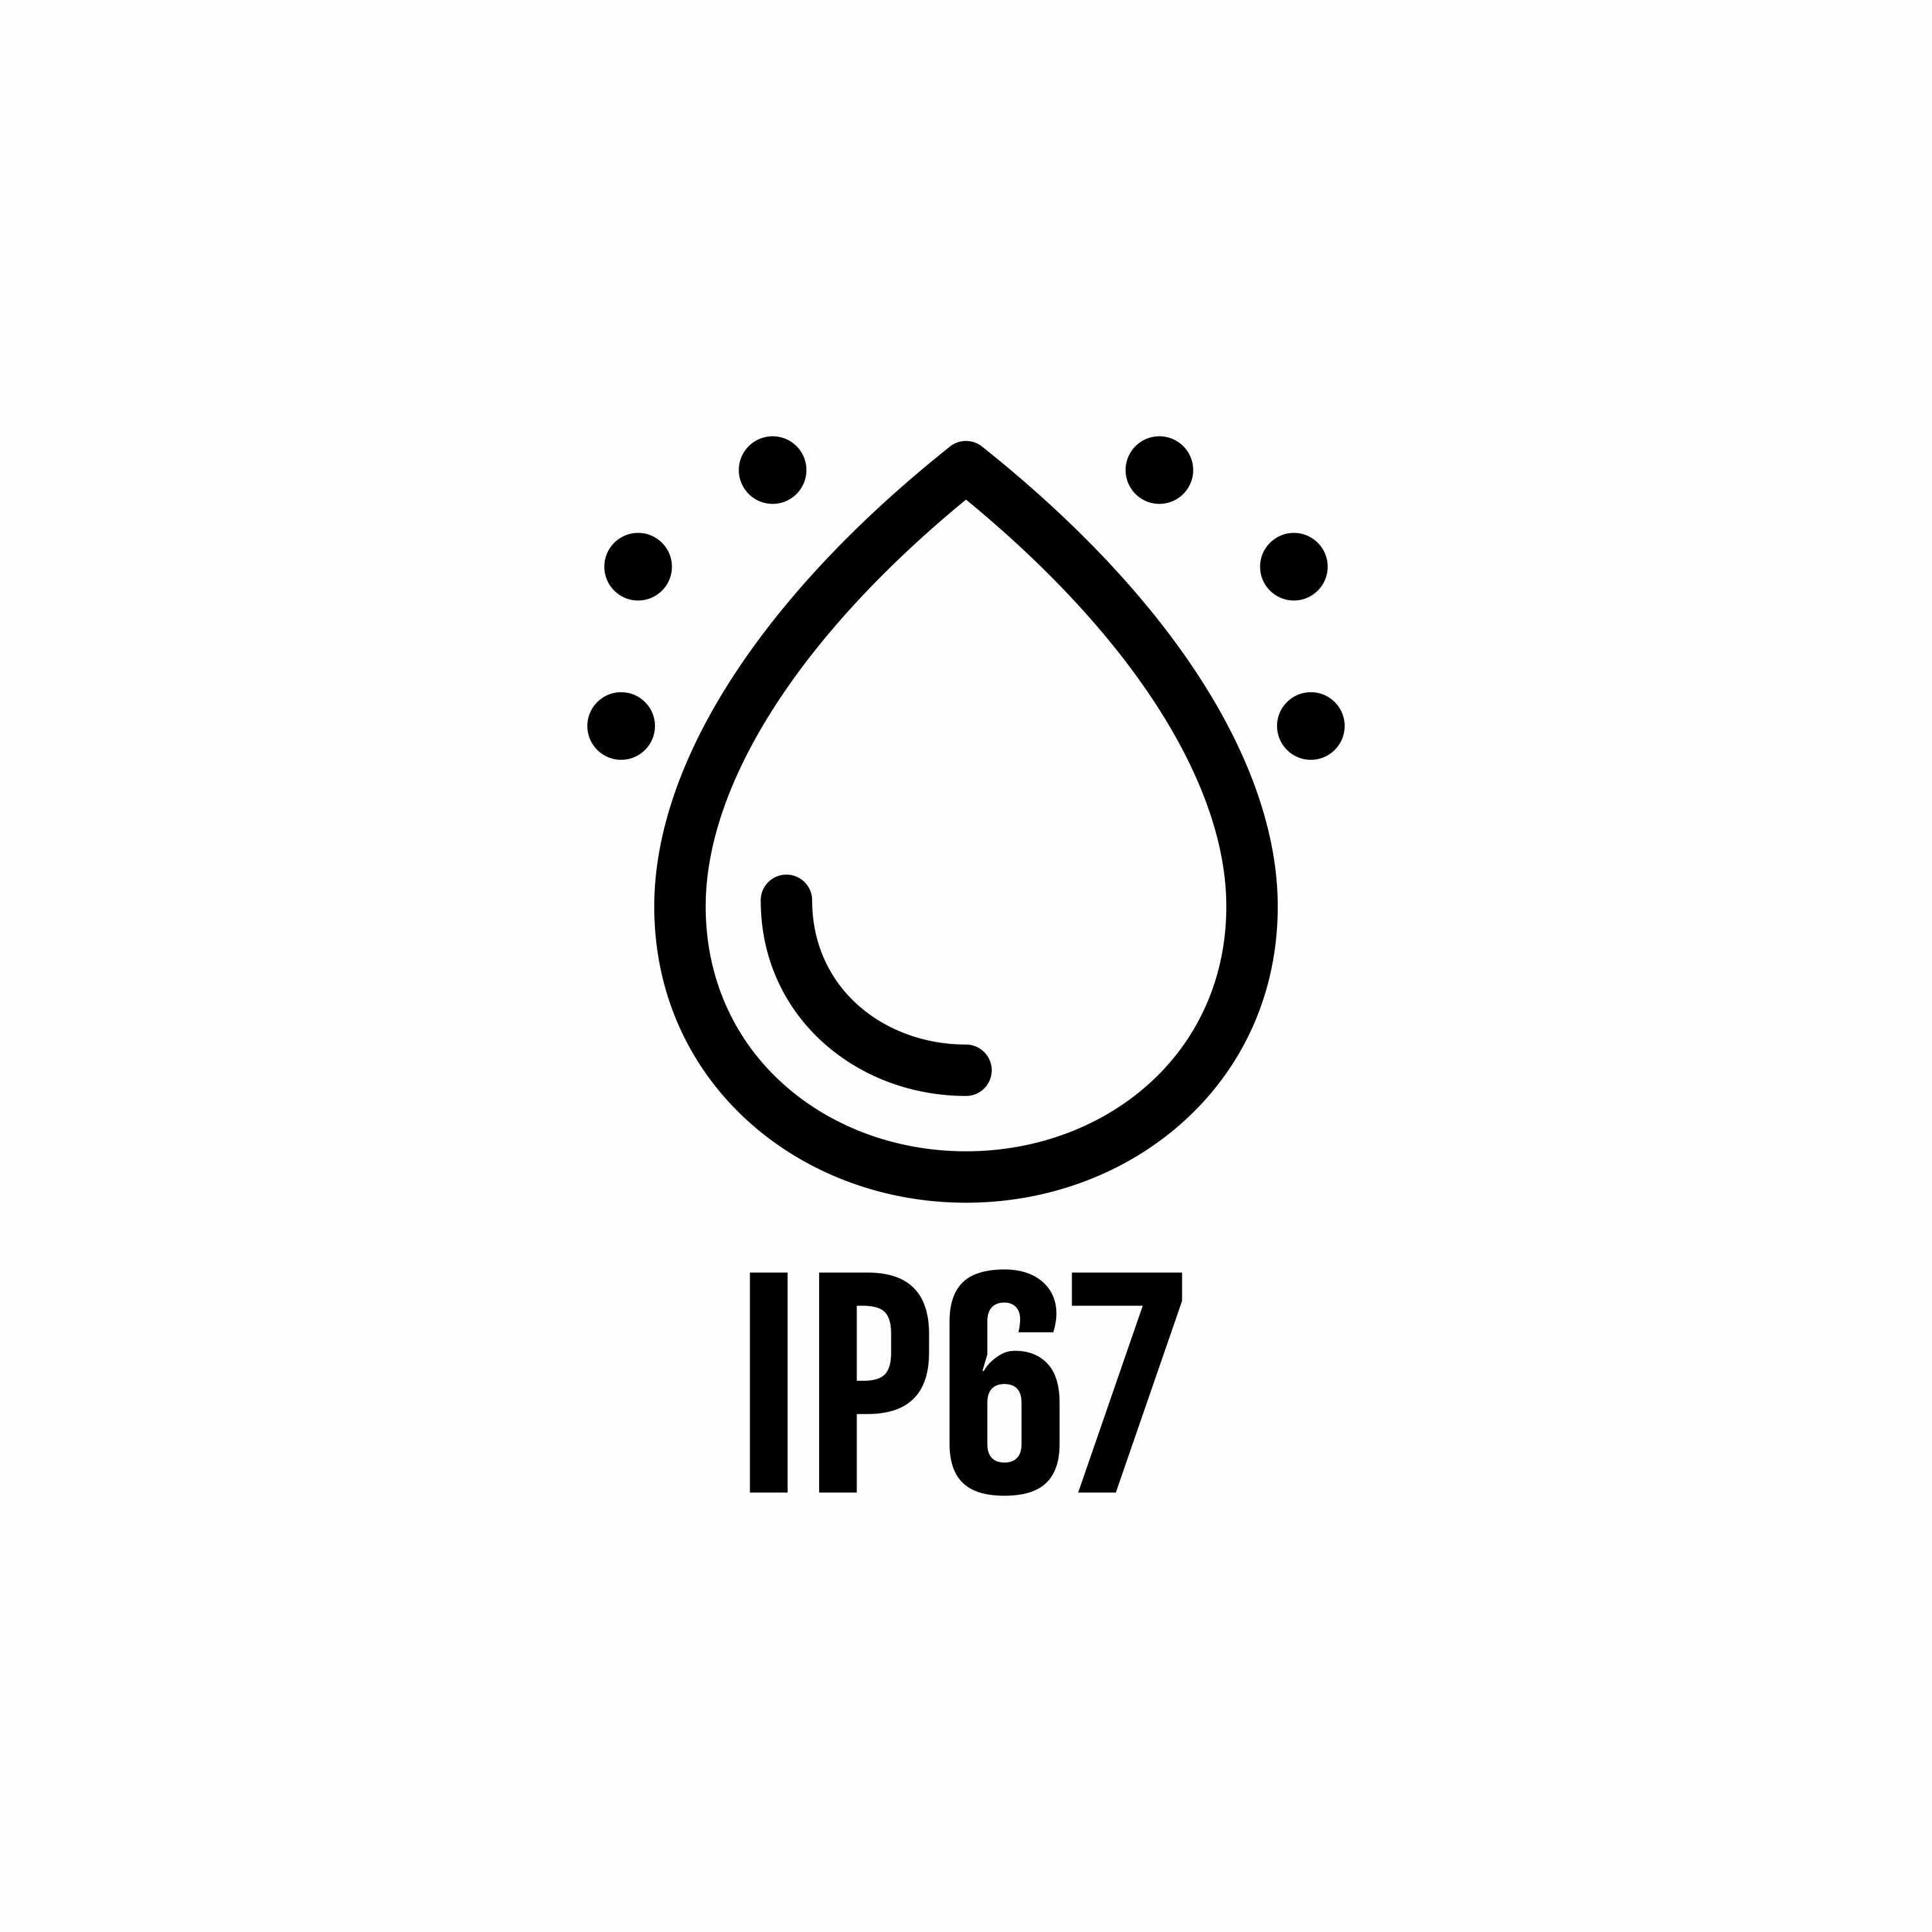 Battery IP67 Rating and What It Means